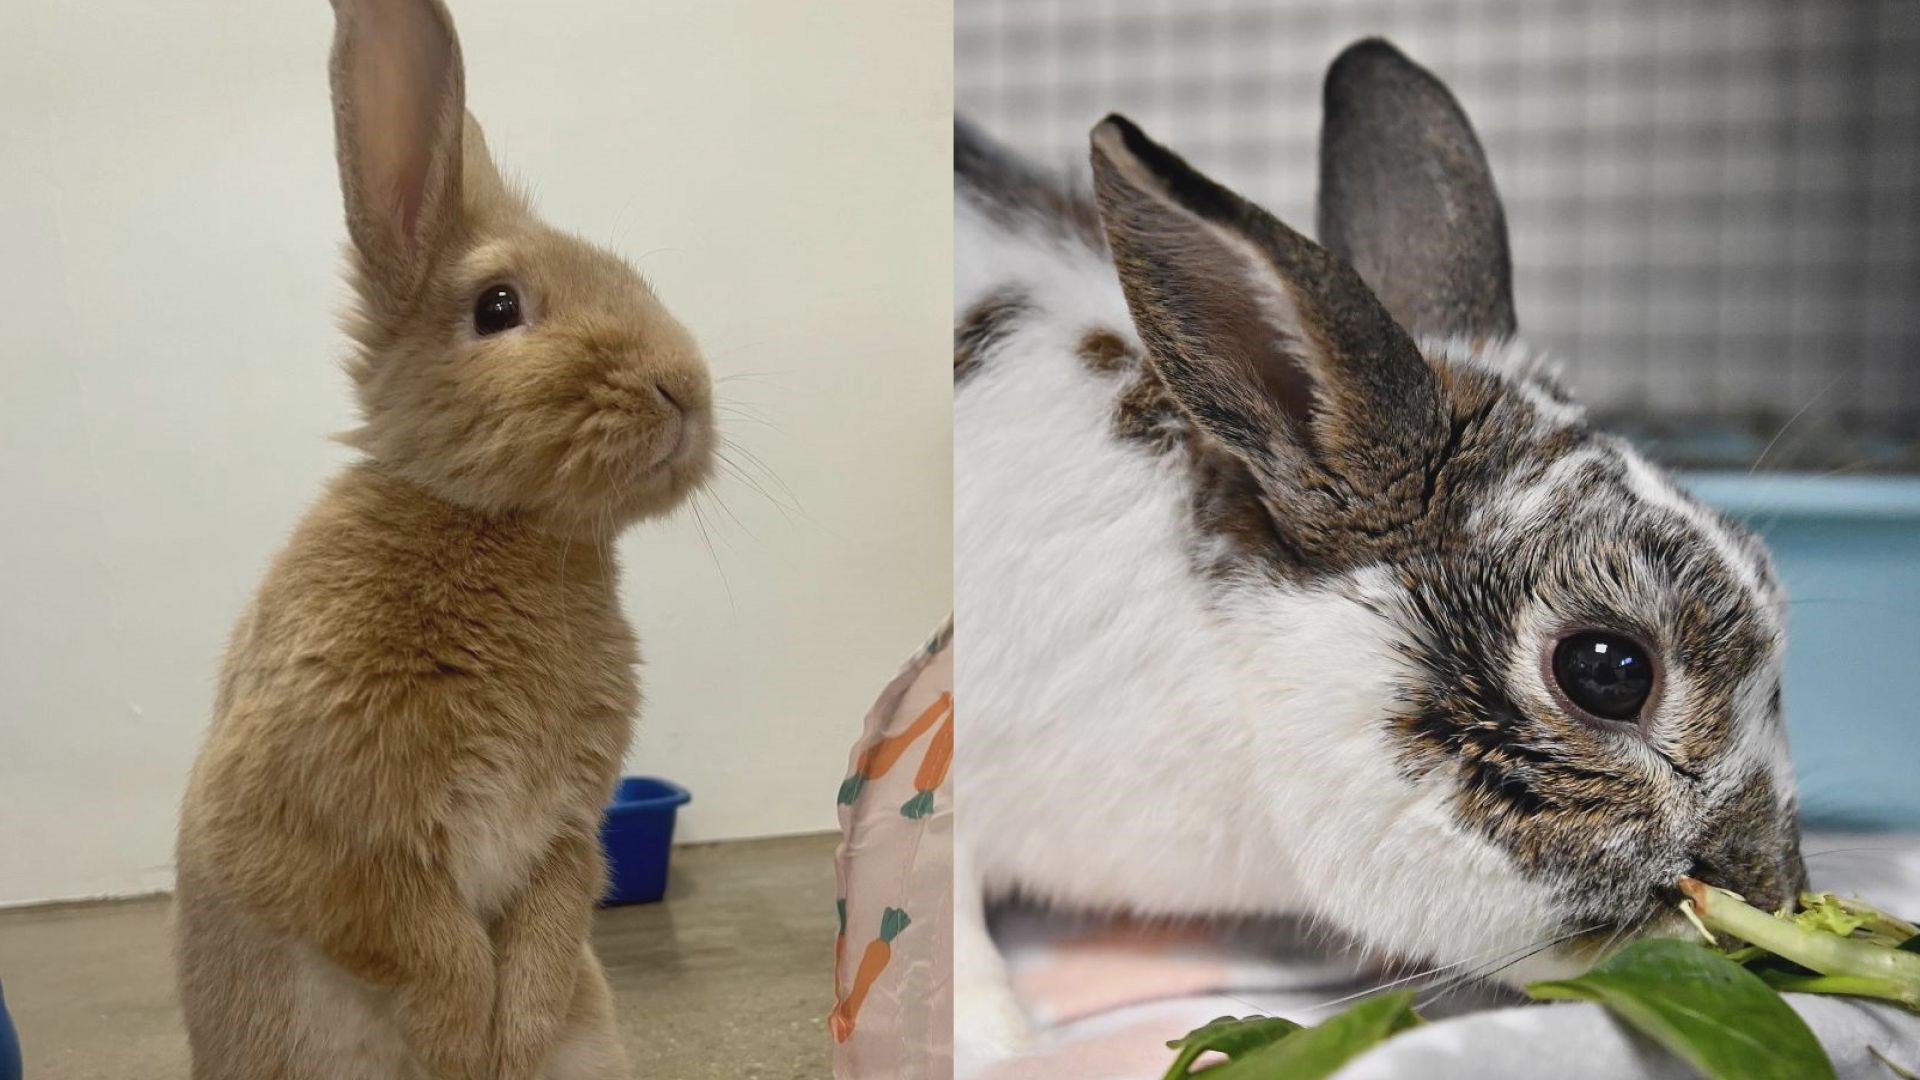 The York County SPCA has numerous rabbits looking for homes and is hosting a  small animal adoption event on Saturday, April 13 to help them find forever families.